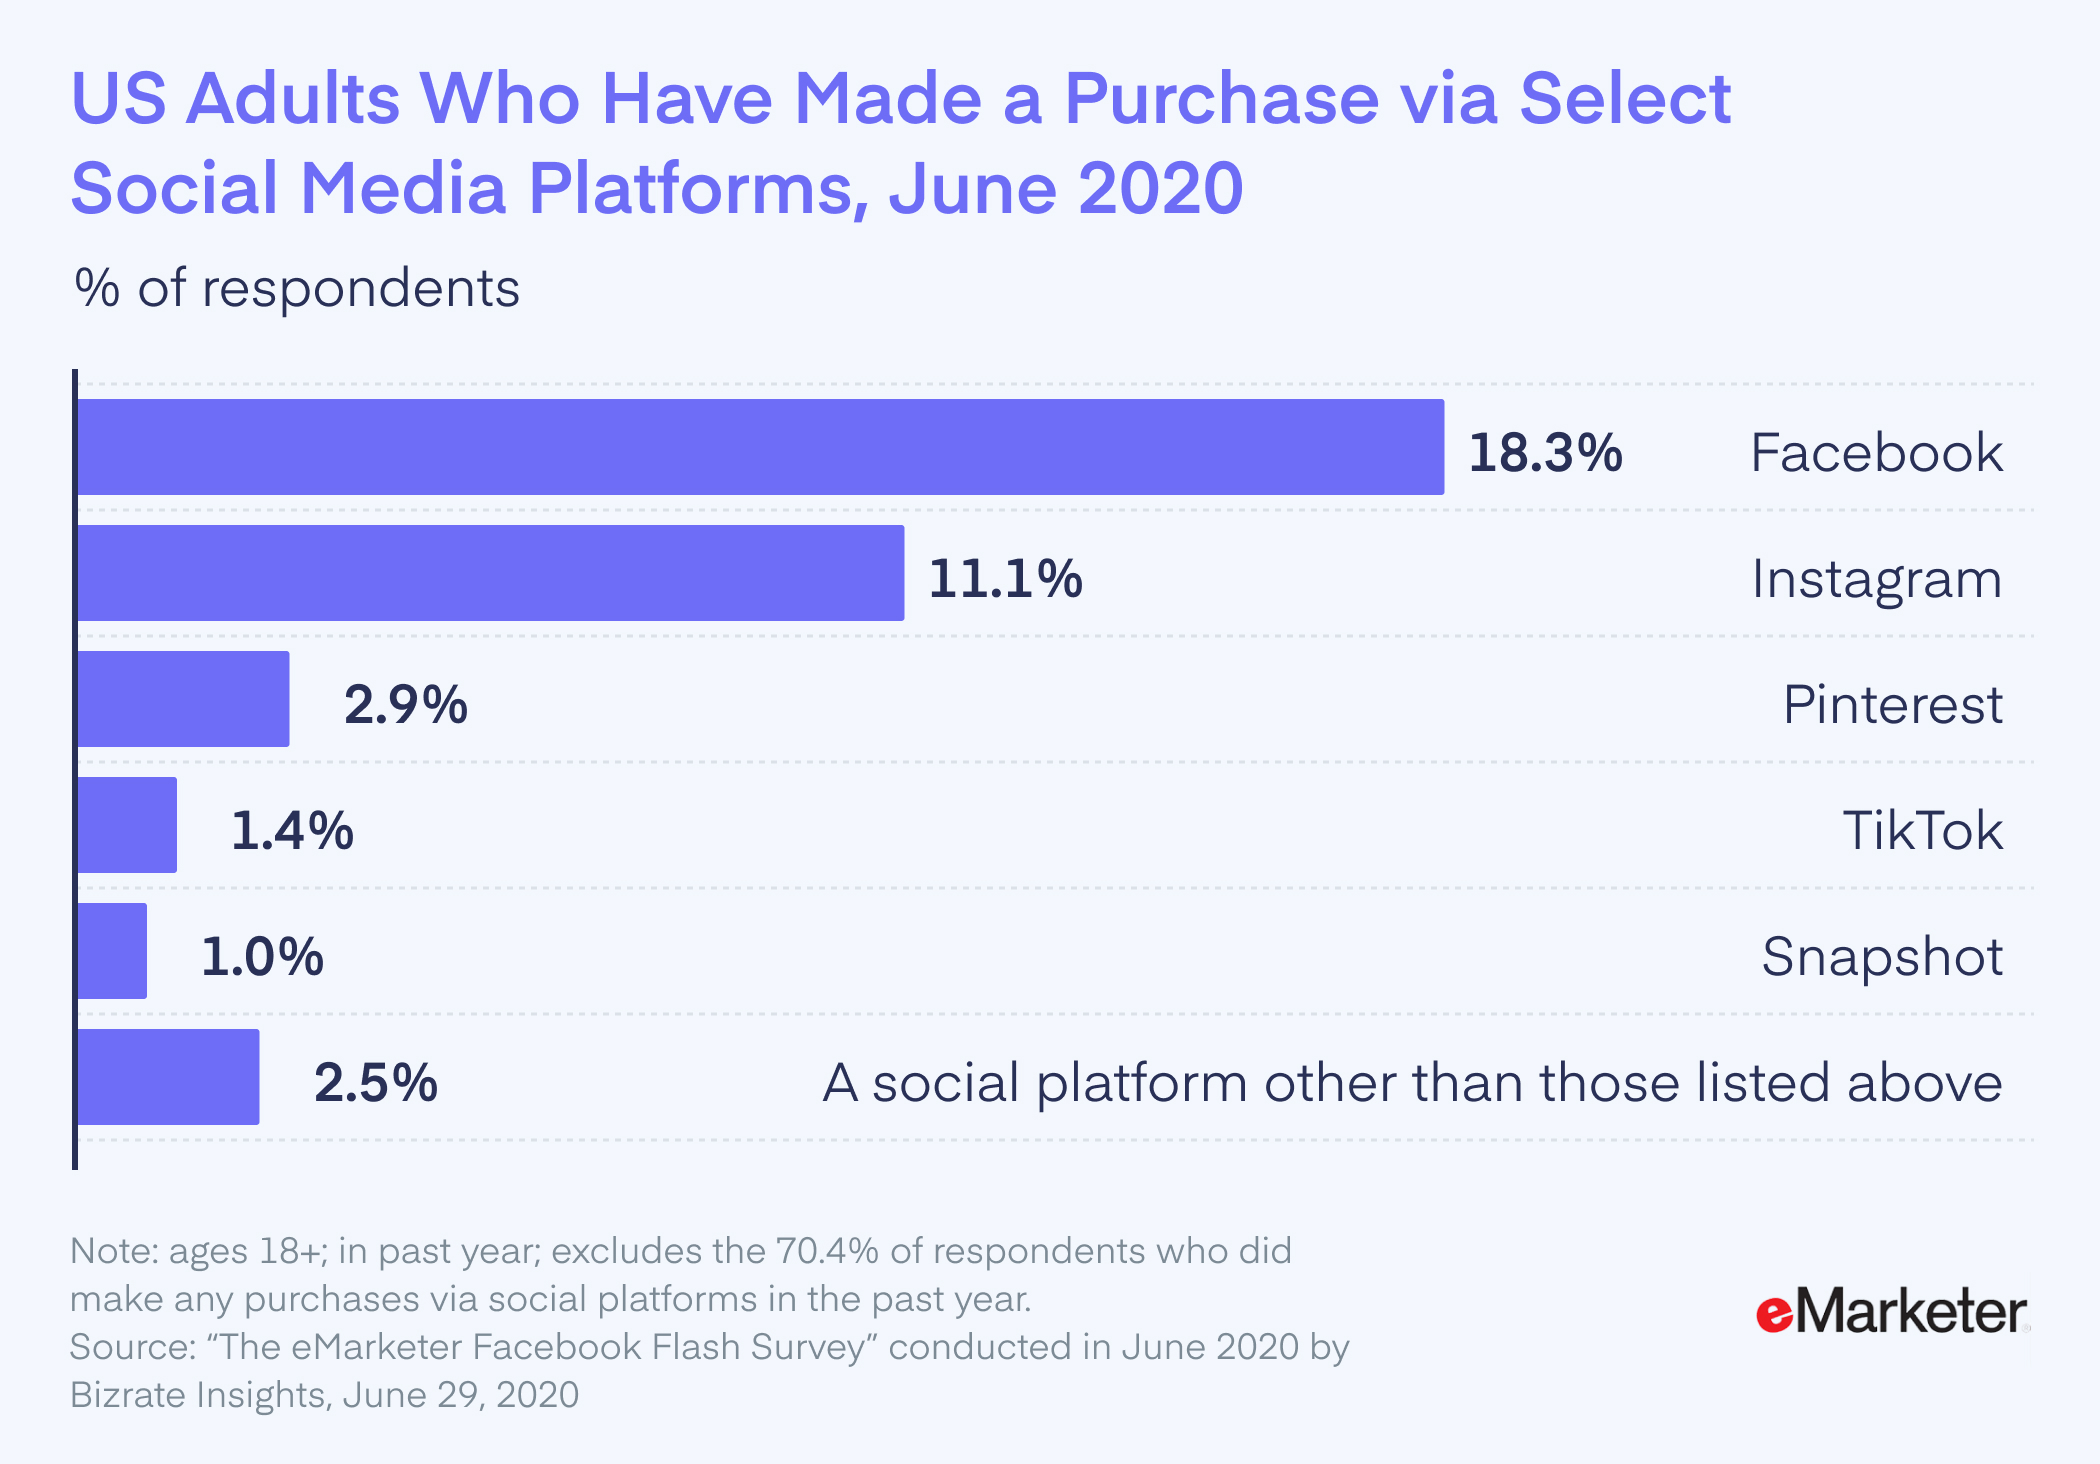 US Adults Who Have Made a Purchase via Select Social Media Platforms, June 2020